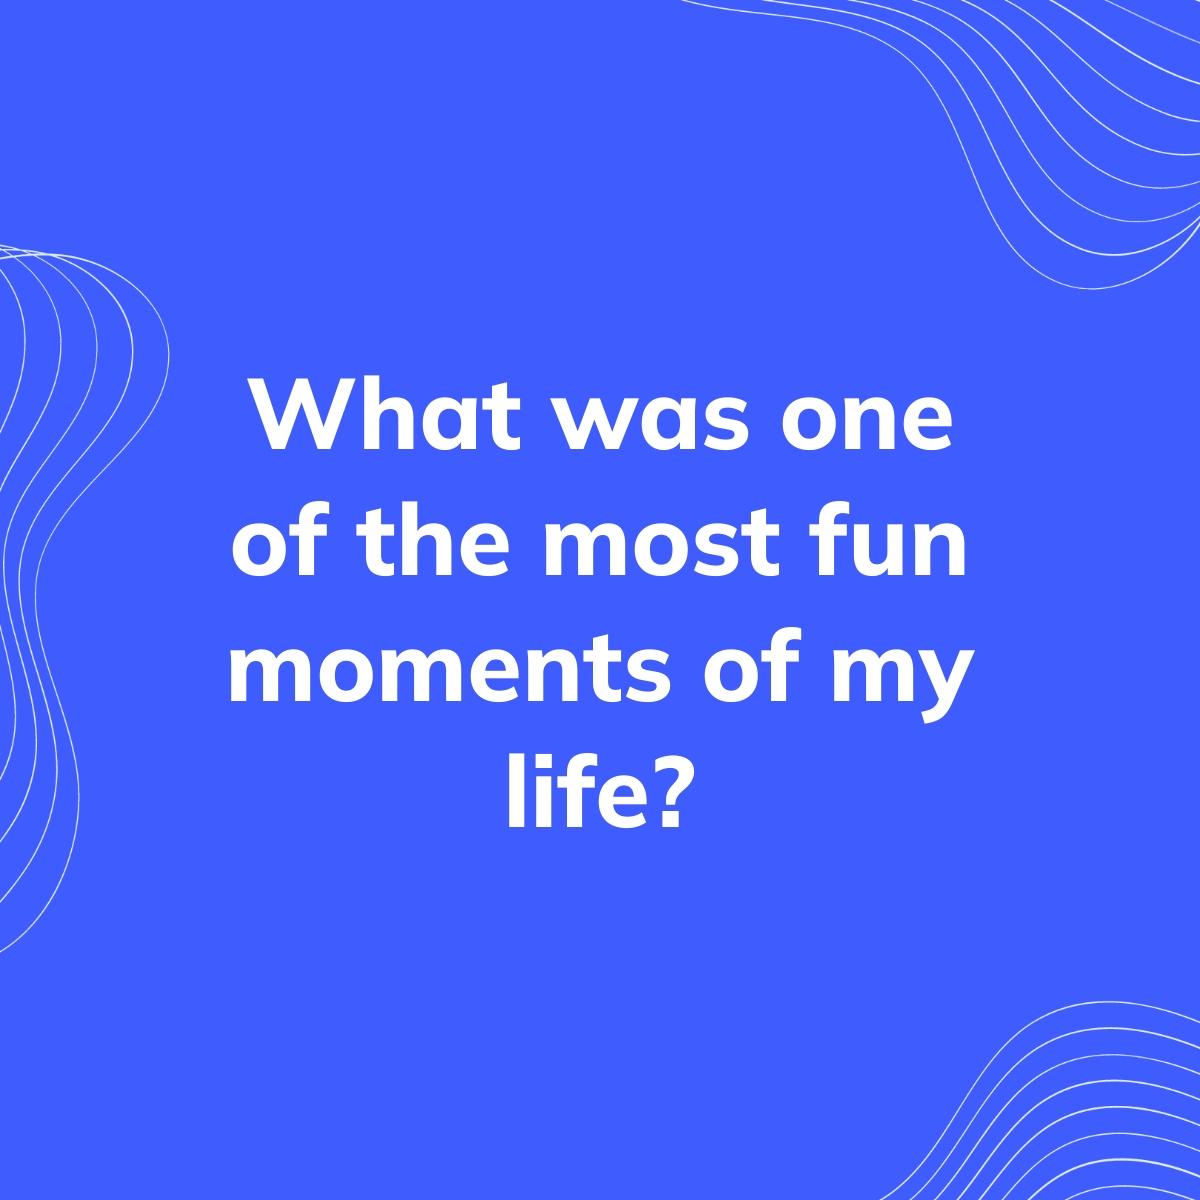 Journal Prompt: What was one of the most fun moments of my life?